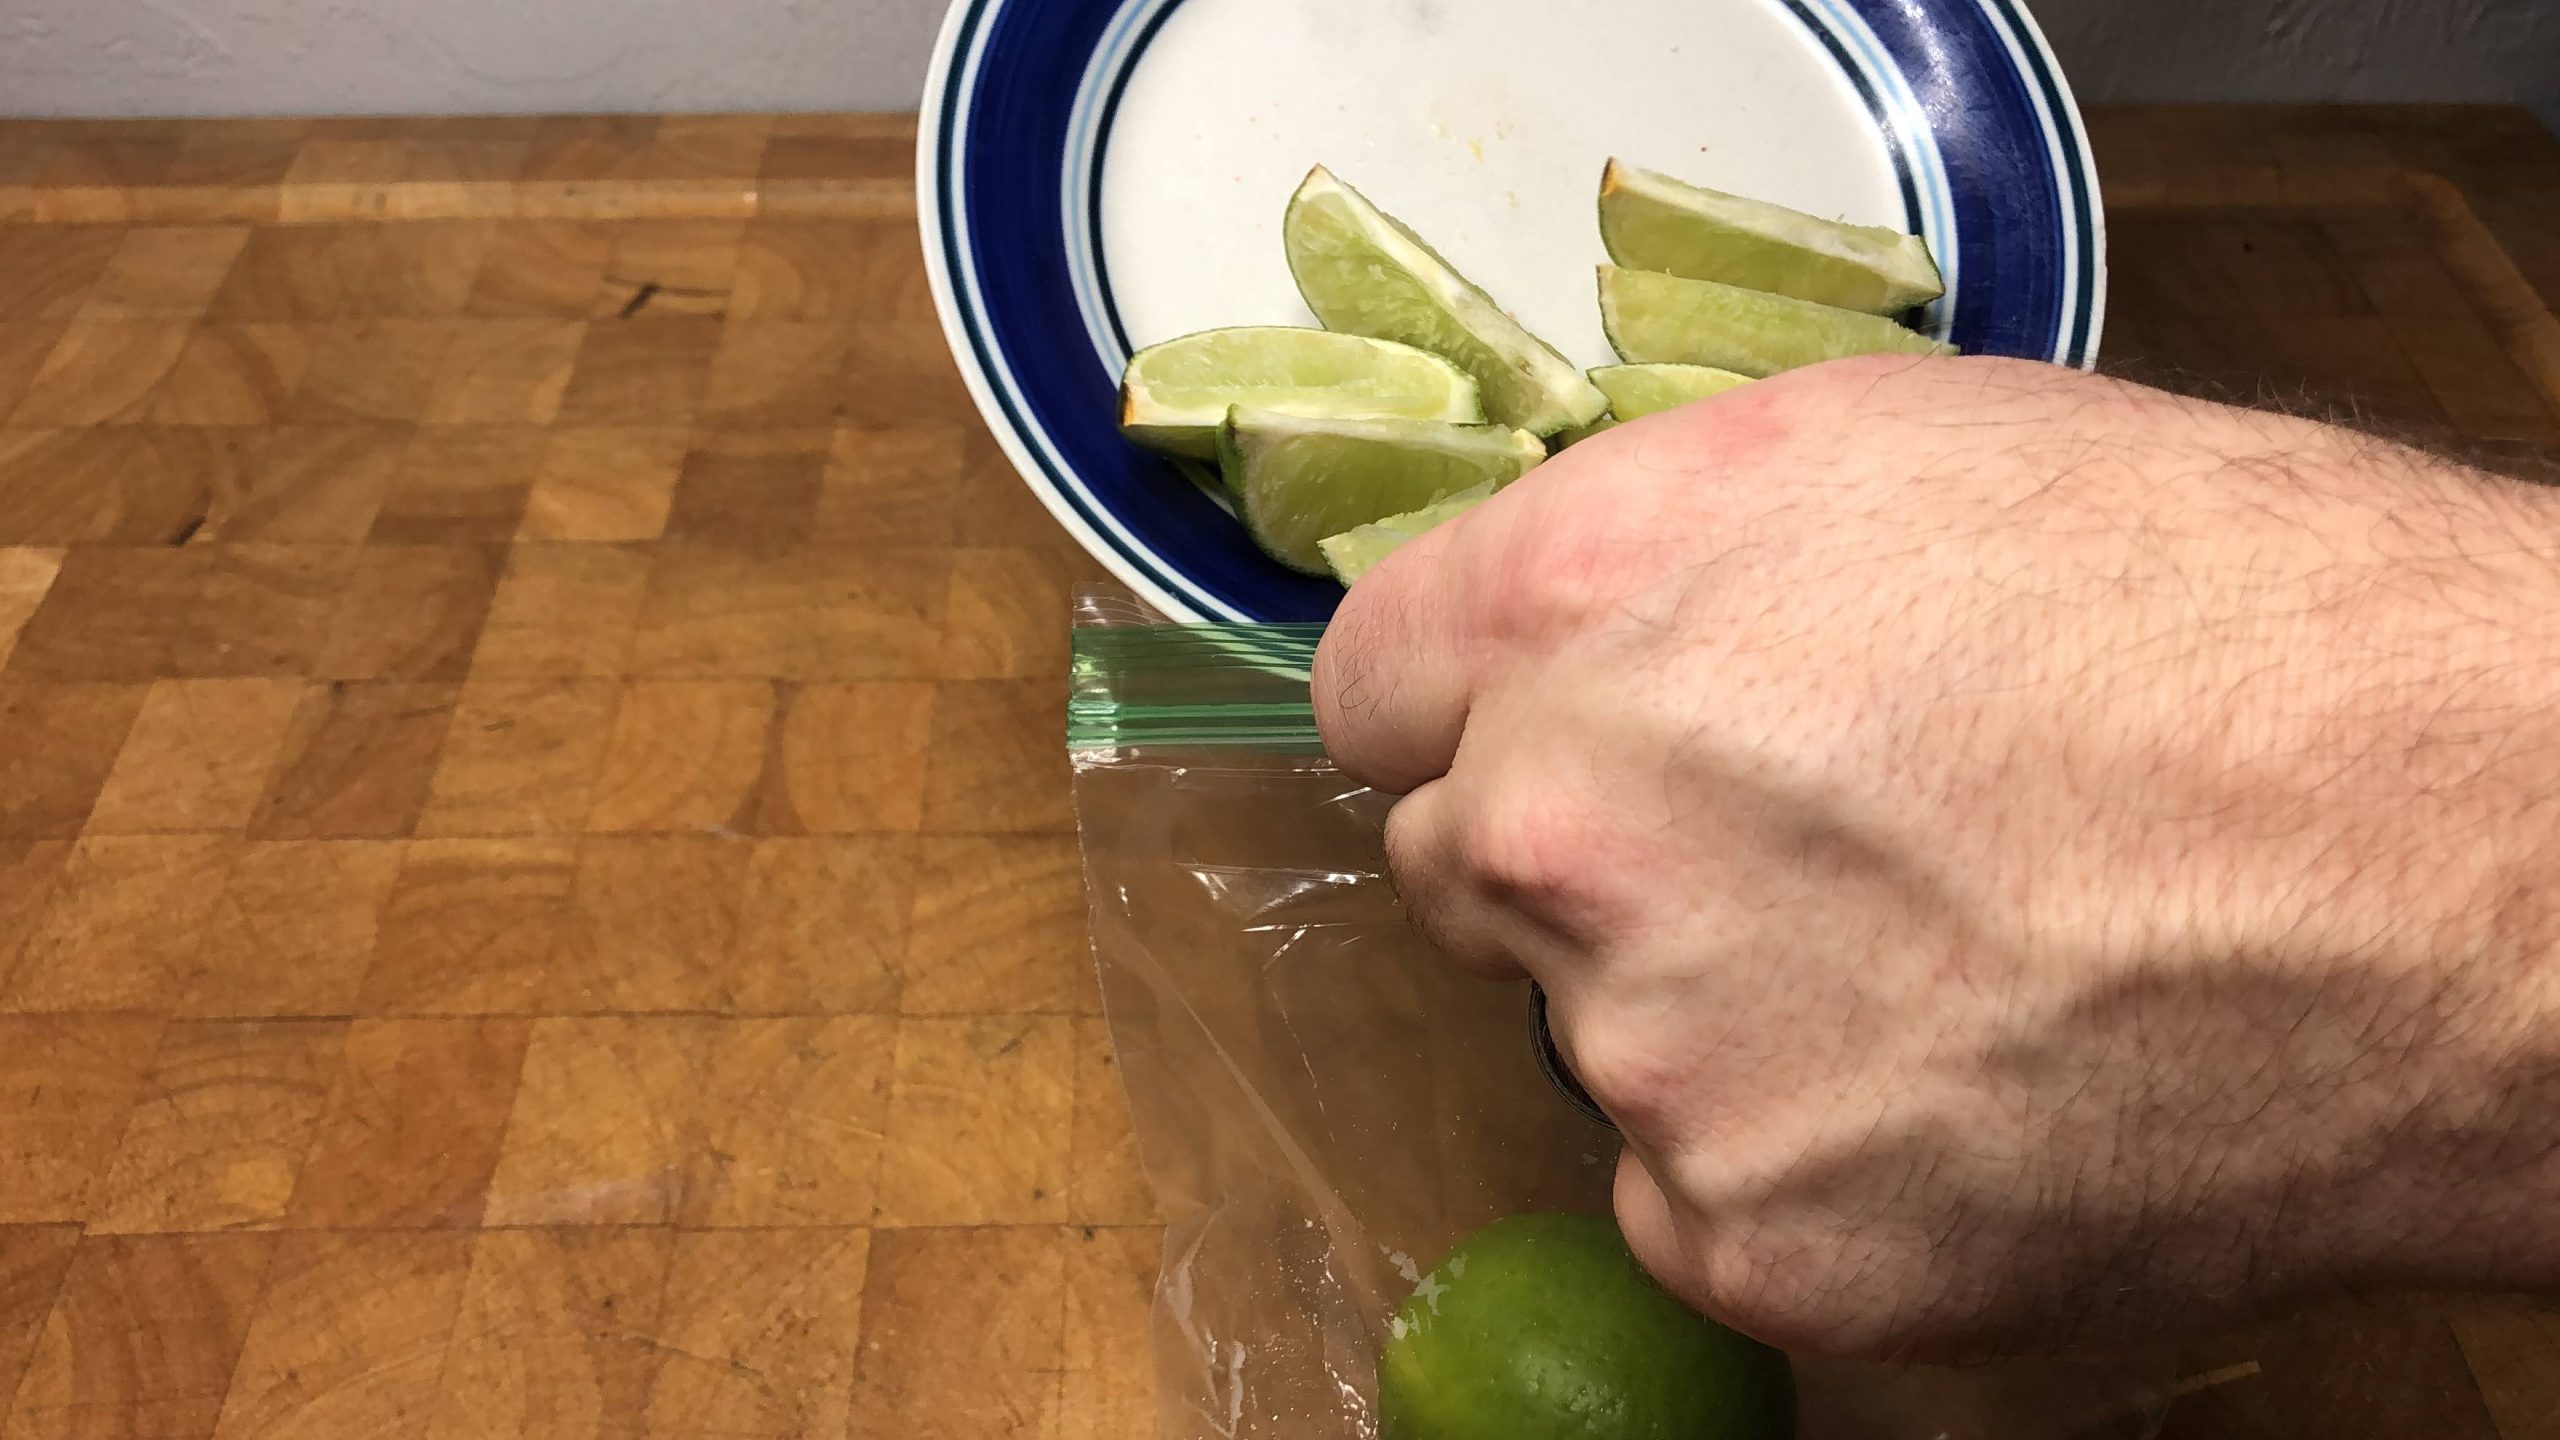 putting lime slices into a freezer bag